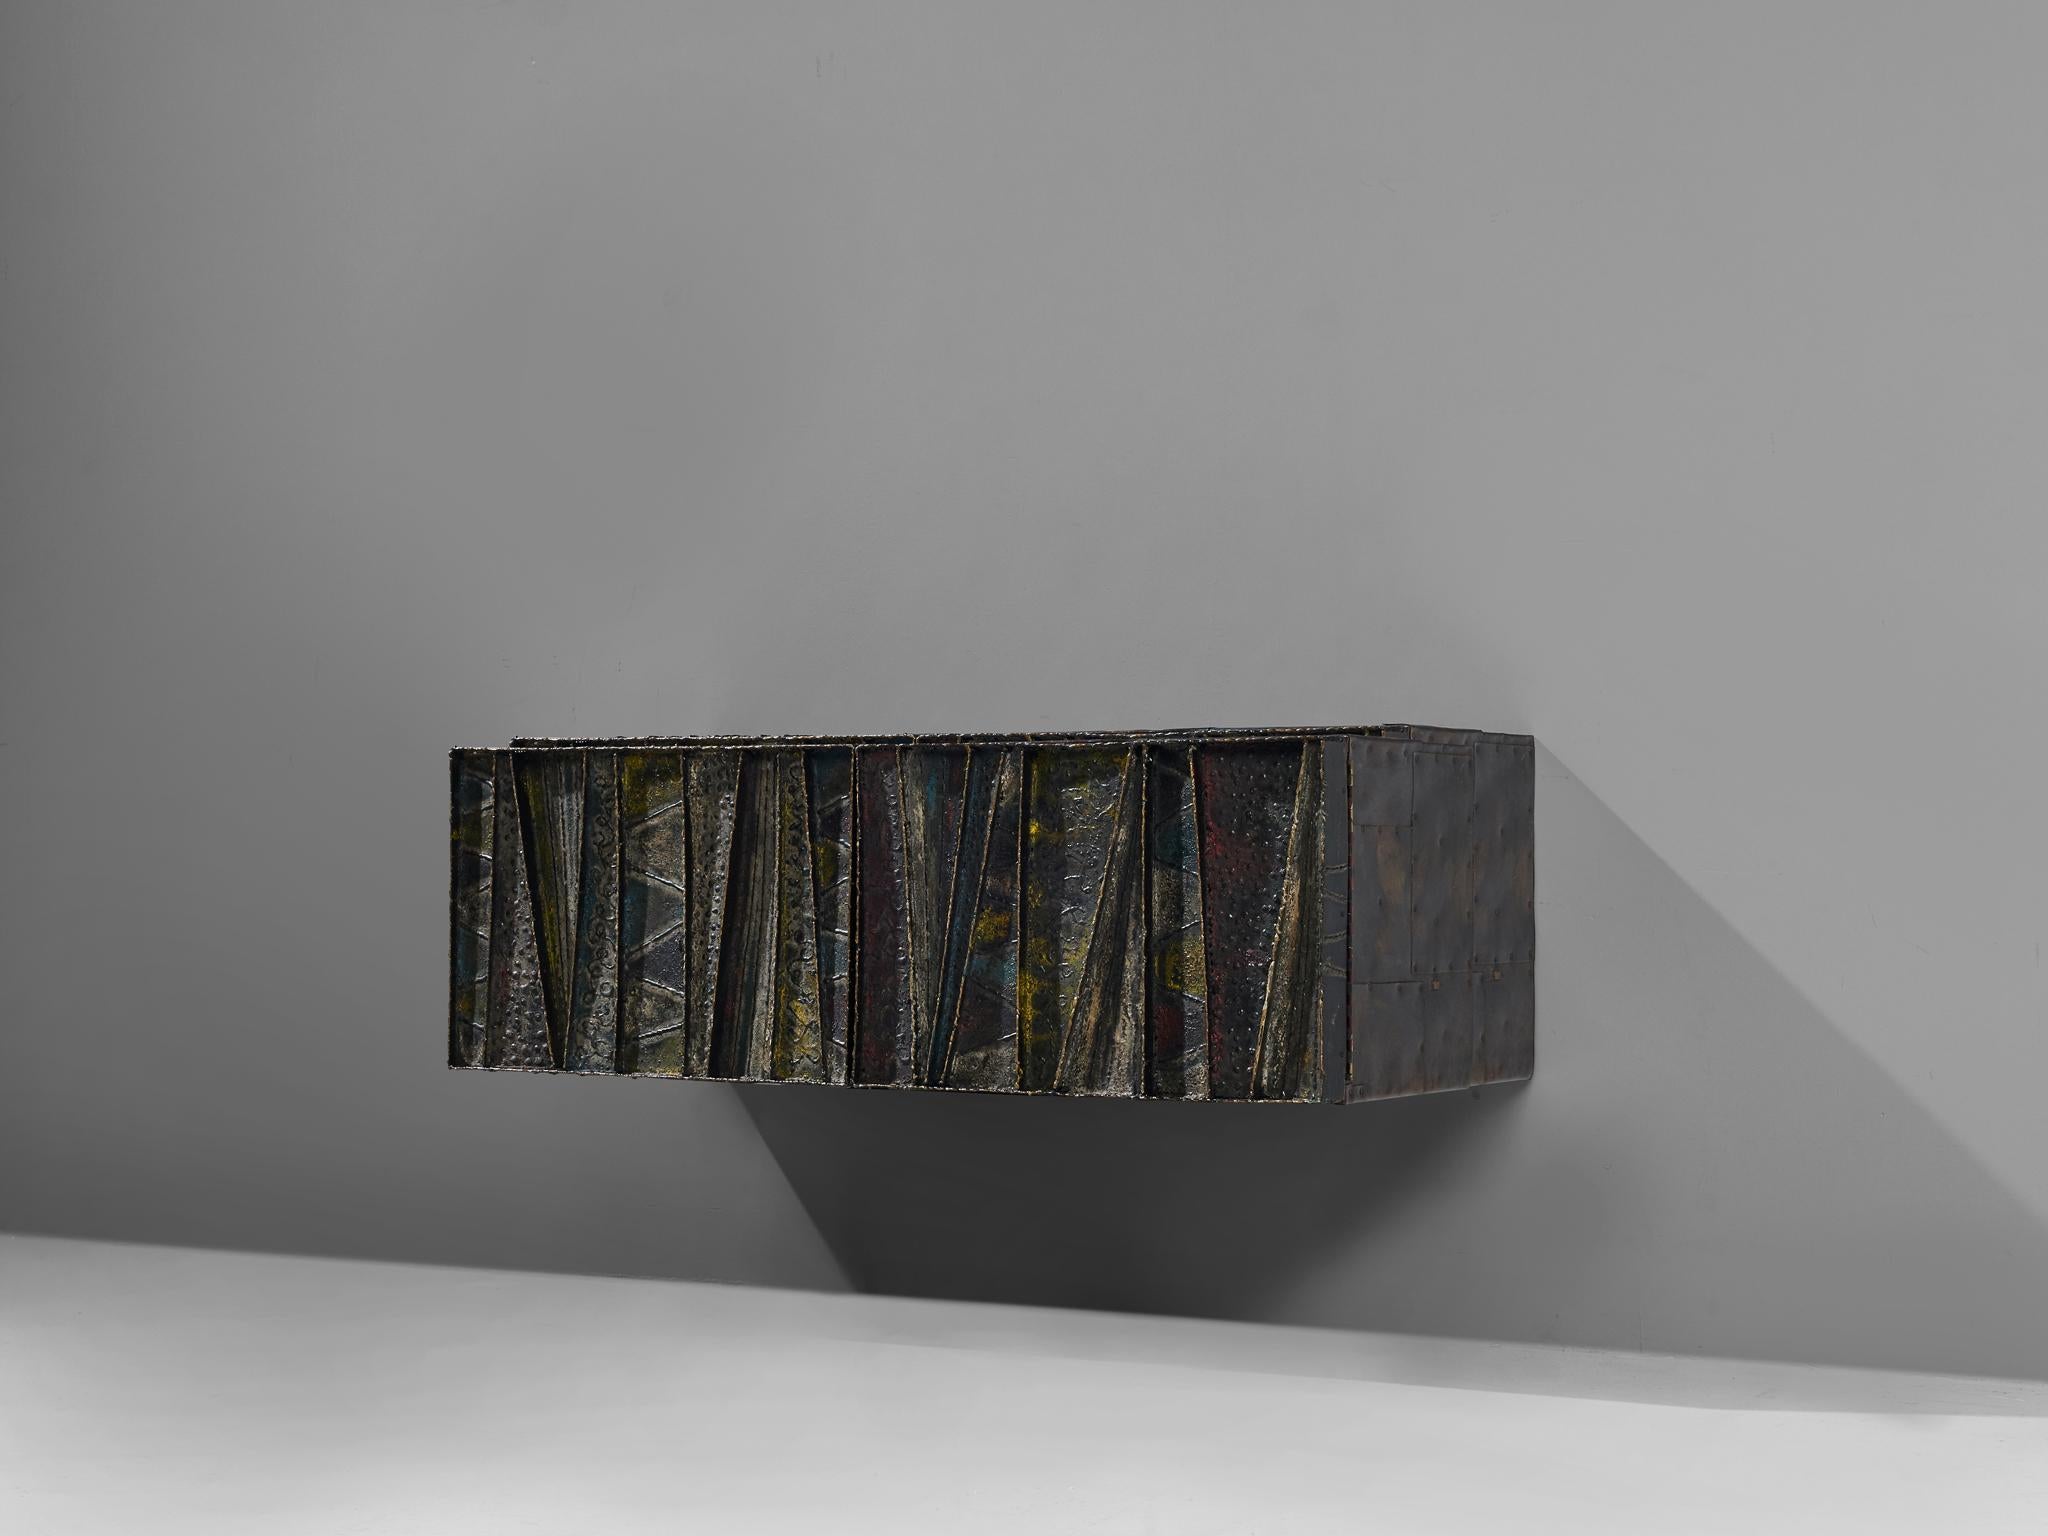 Paul Evans for Paul Evans Studio, deep relief, wall-mounted sideboard model PE-19, welded and patinated steel and darkened wood, United States, circa 1972

Paul Evans 'Deep Relief’ wall-mounted cabinet with welded and patinated steel doors in